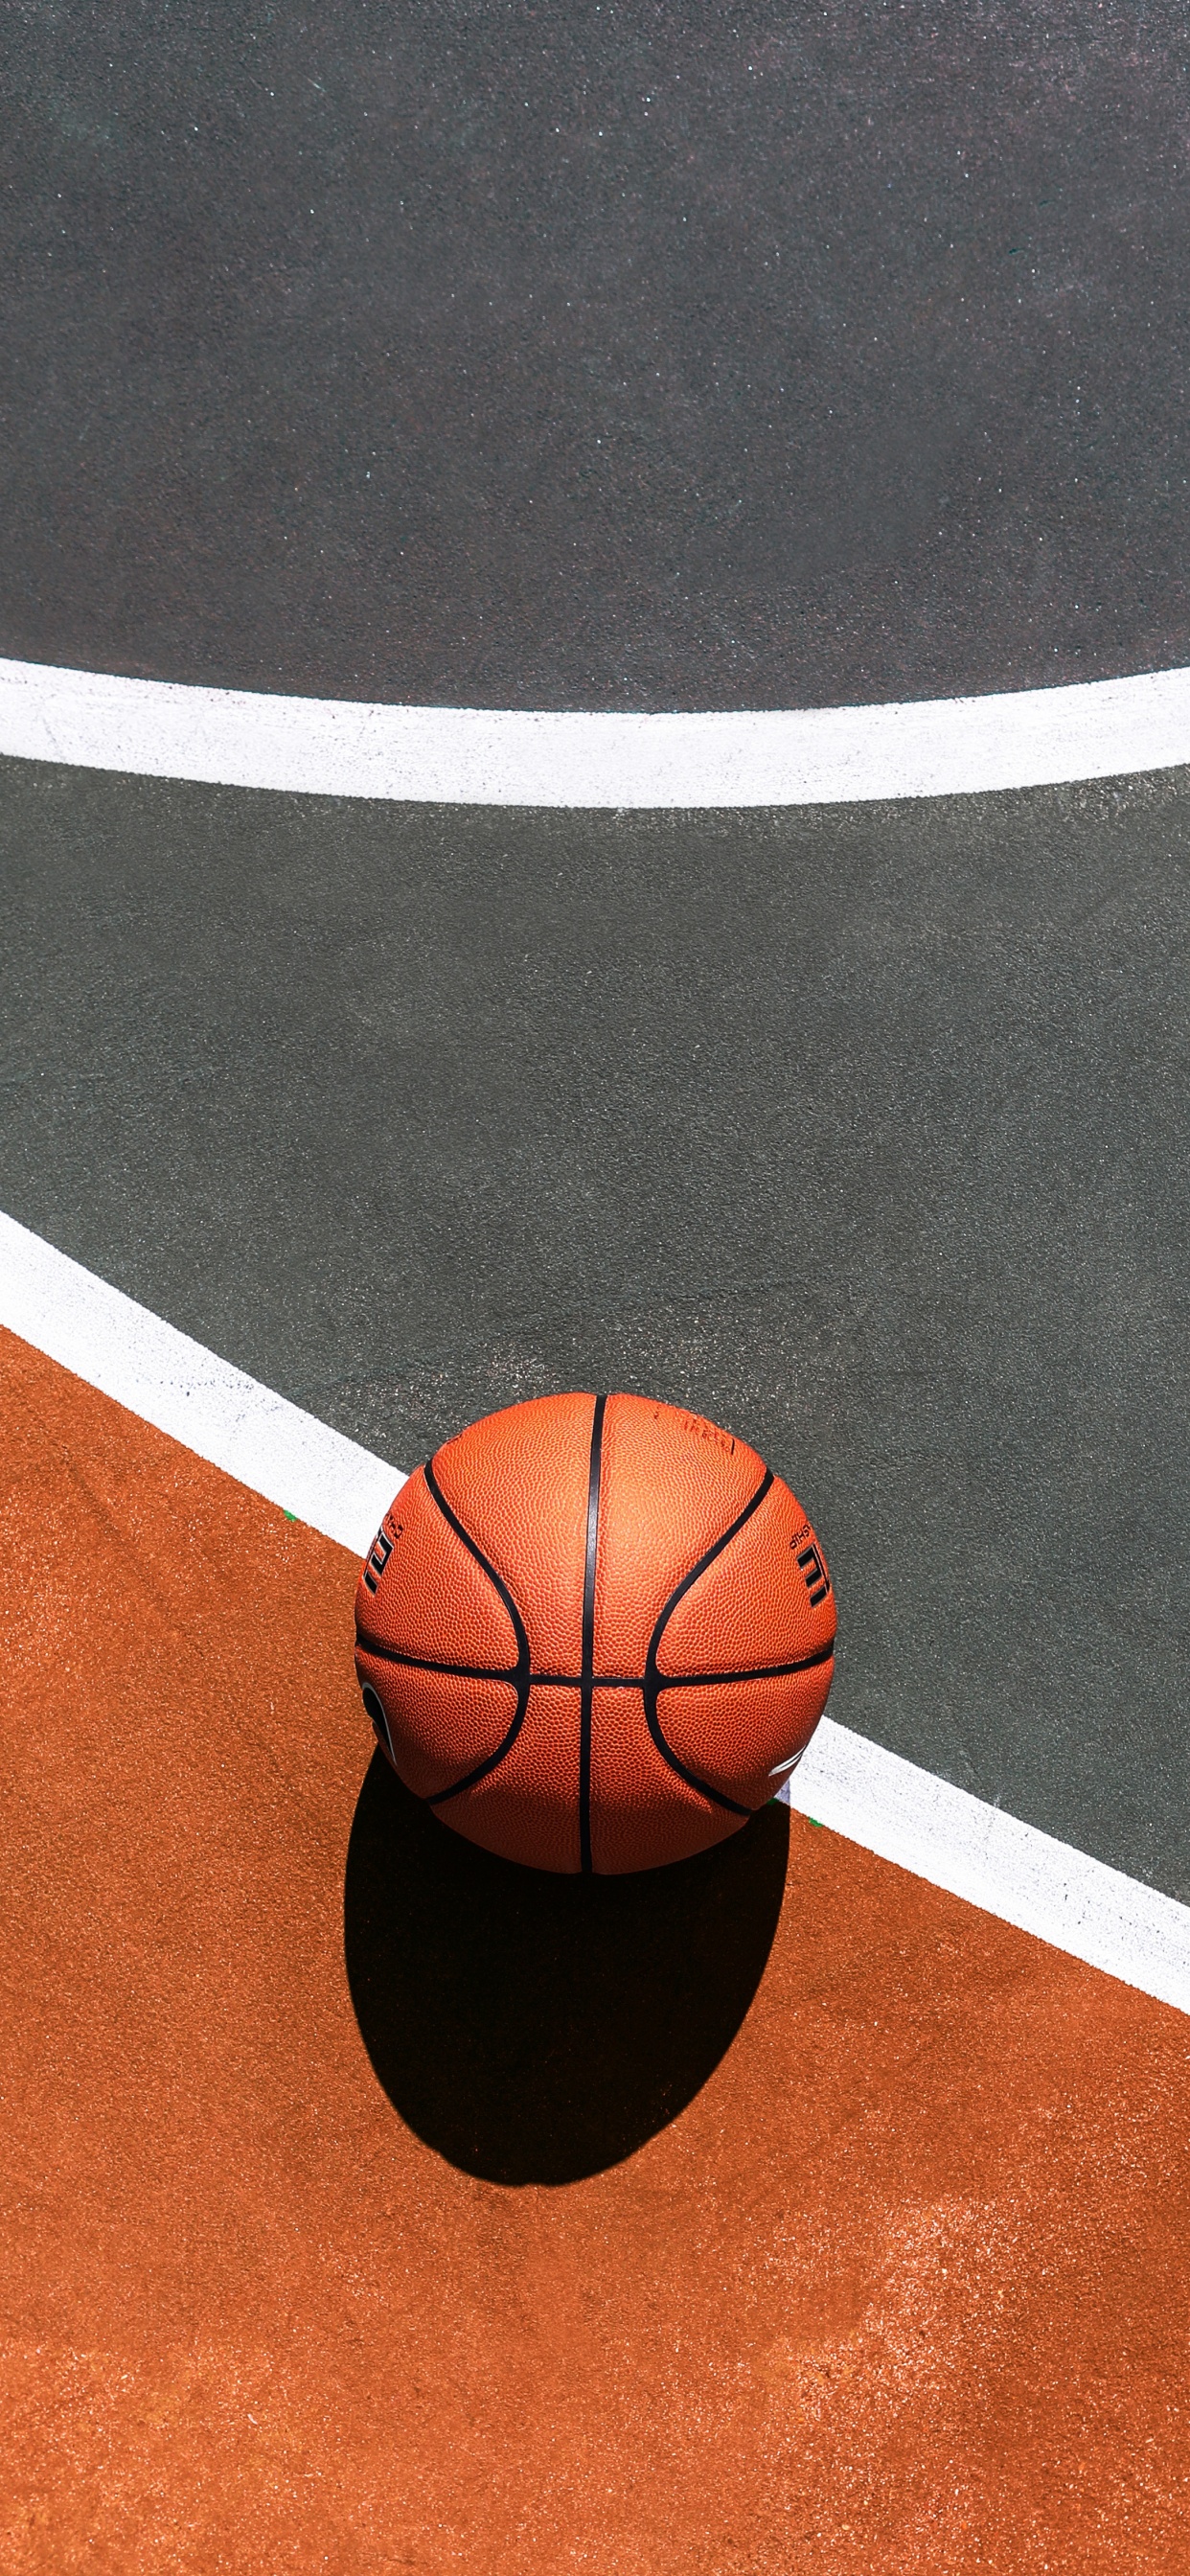 Basketball on Blue and White Basketball Court. Wallpaper in 1242x2688 Resolution